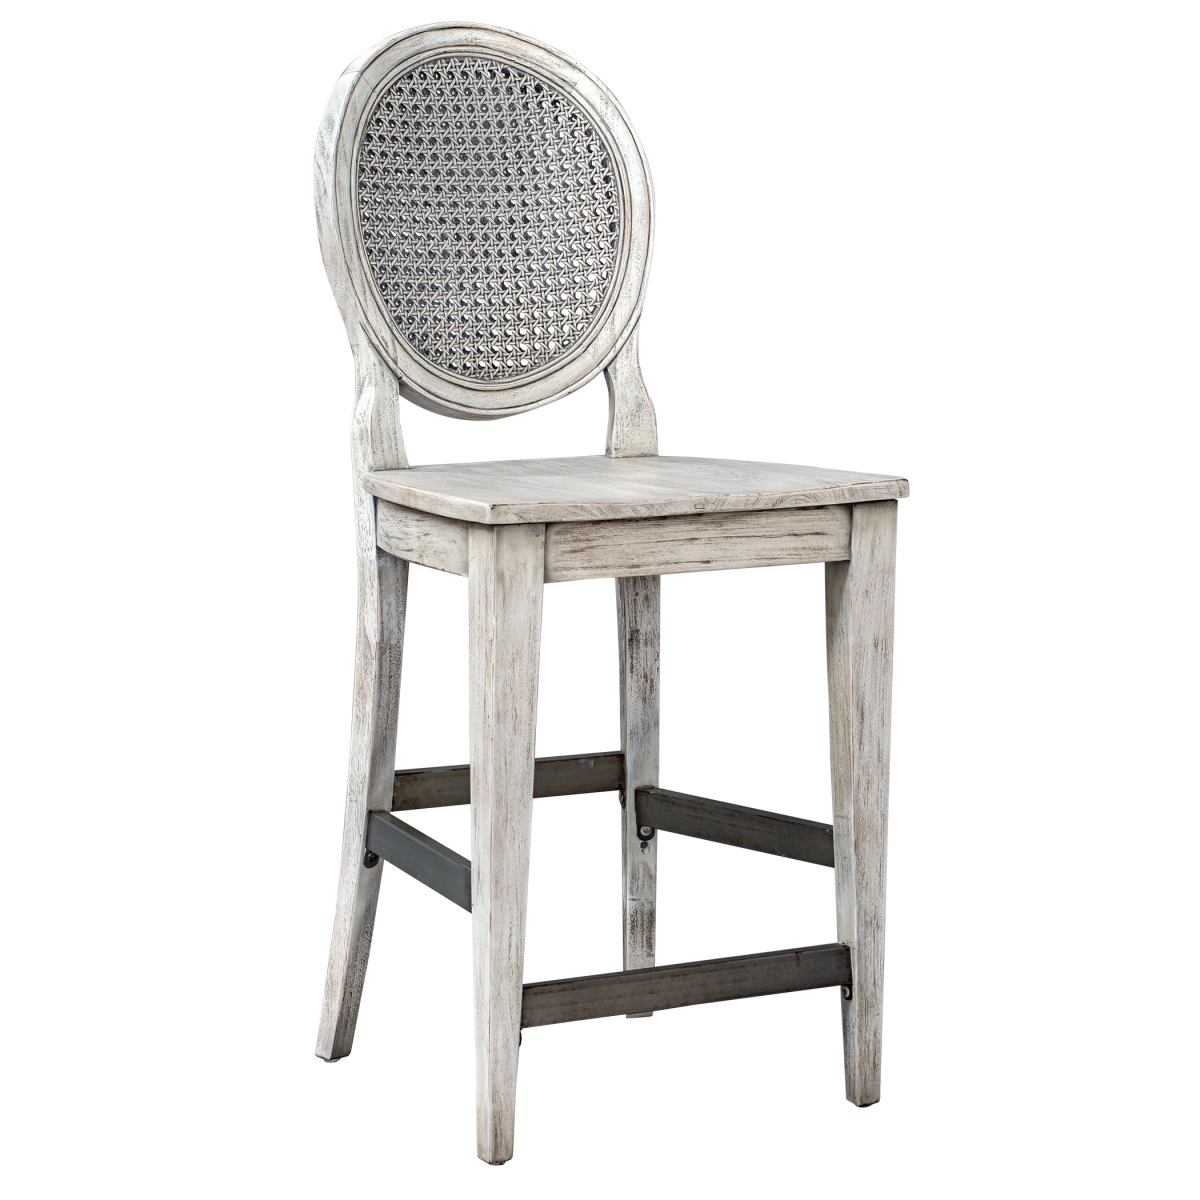 Picture of 212 Main 25438 Clarion Aged White Counter Stool - 40 x 19 x 19 in.